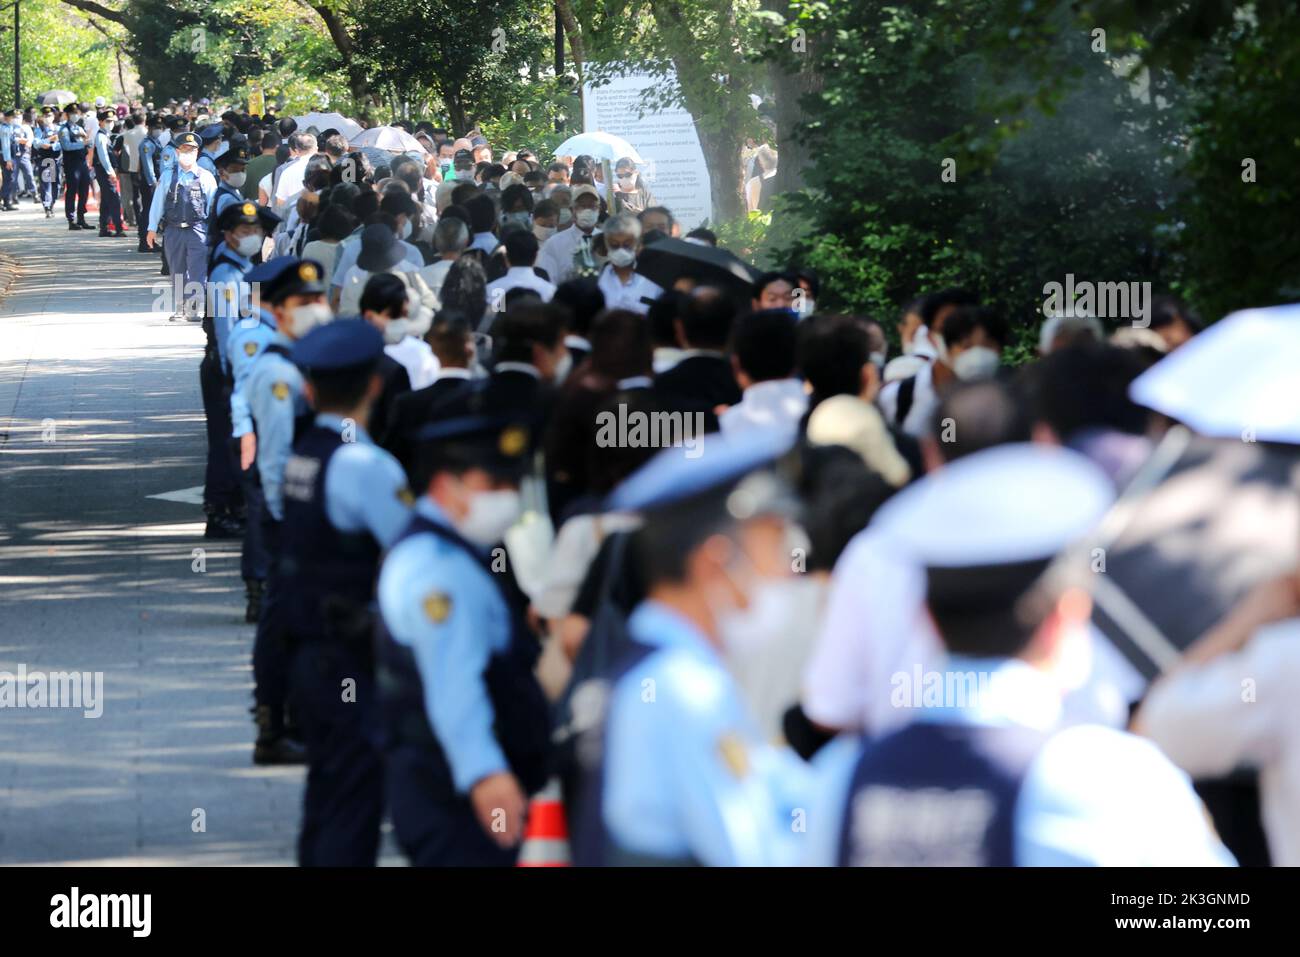 Tokyo, Japan on September 27, 2022People line up near the Nippon Budokan to offer flowers ahead of the state funeral for Japan's former Prime Minister Shinzo Abe in Tokyo, Japan on September 27, 2022. Credit: Naoki Nishimura/AFLO/Alamy Live News Stock Photo